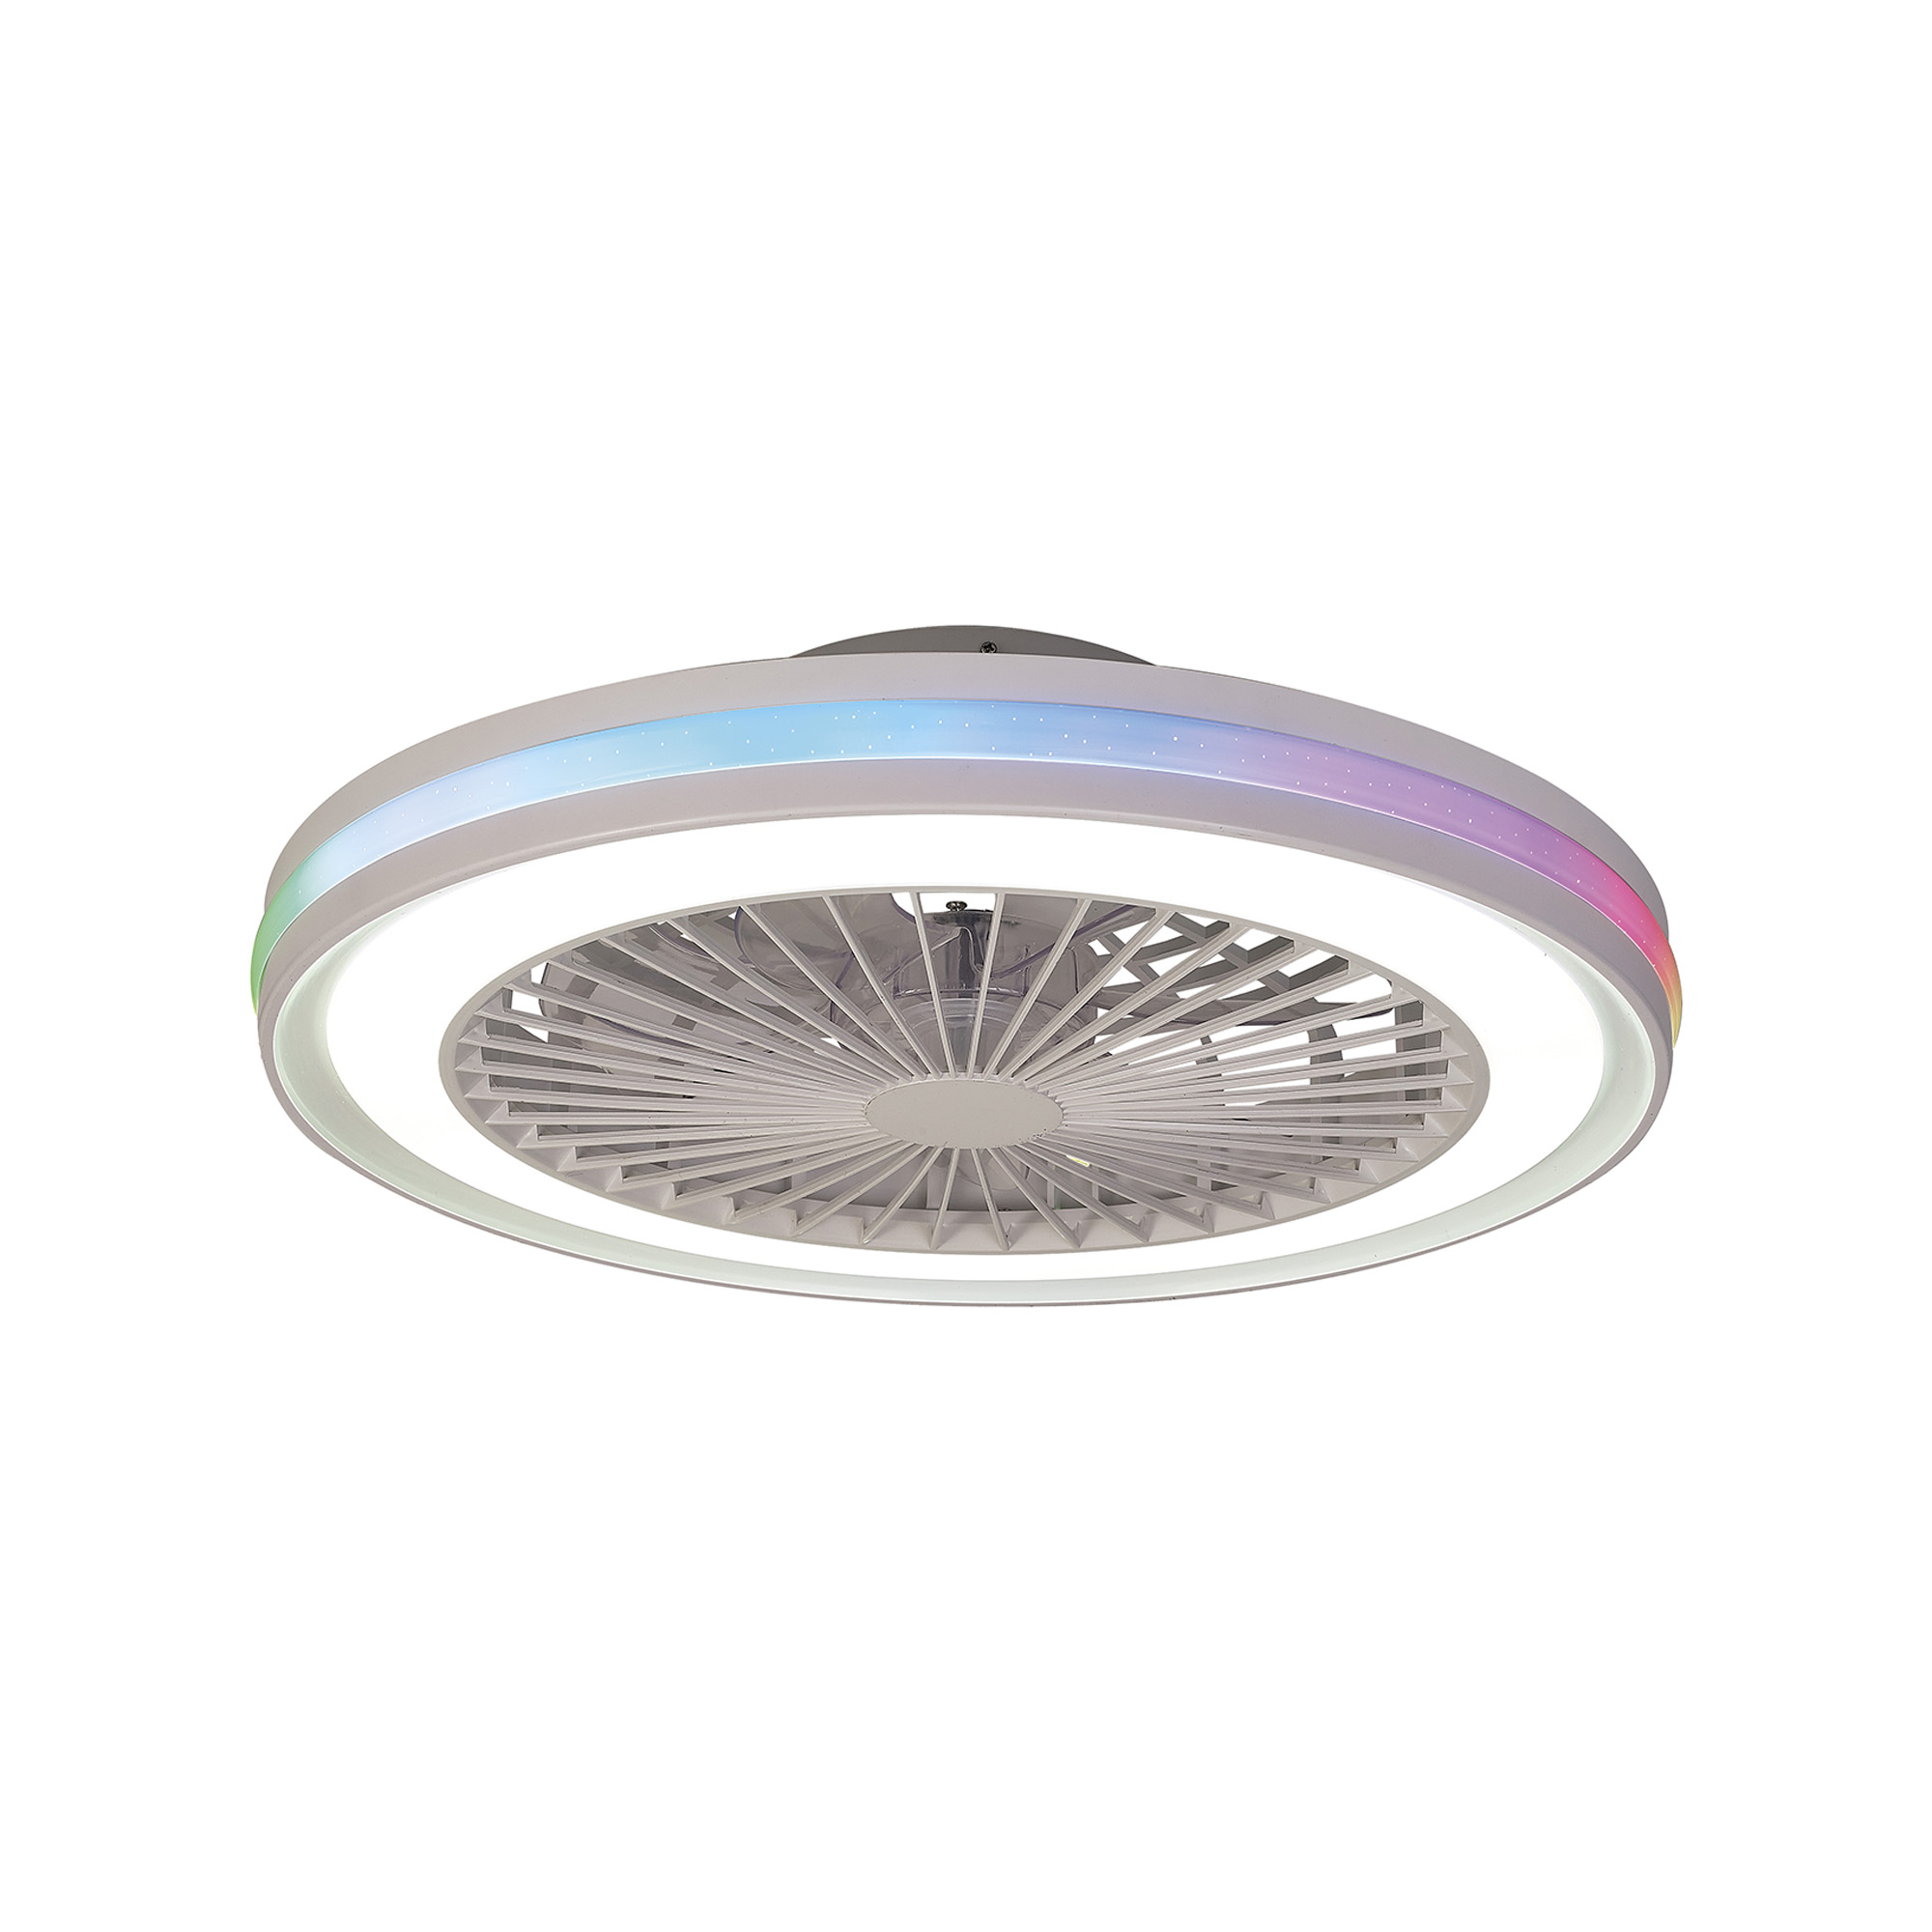 M8291  Gamer 40W LED Dimmable White/RGB Ceiling Light & Fan, Remote